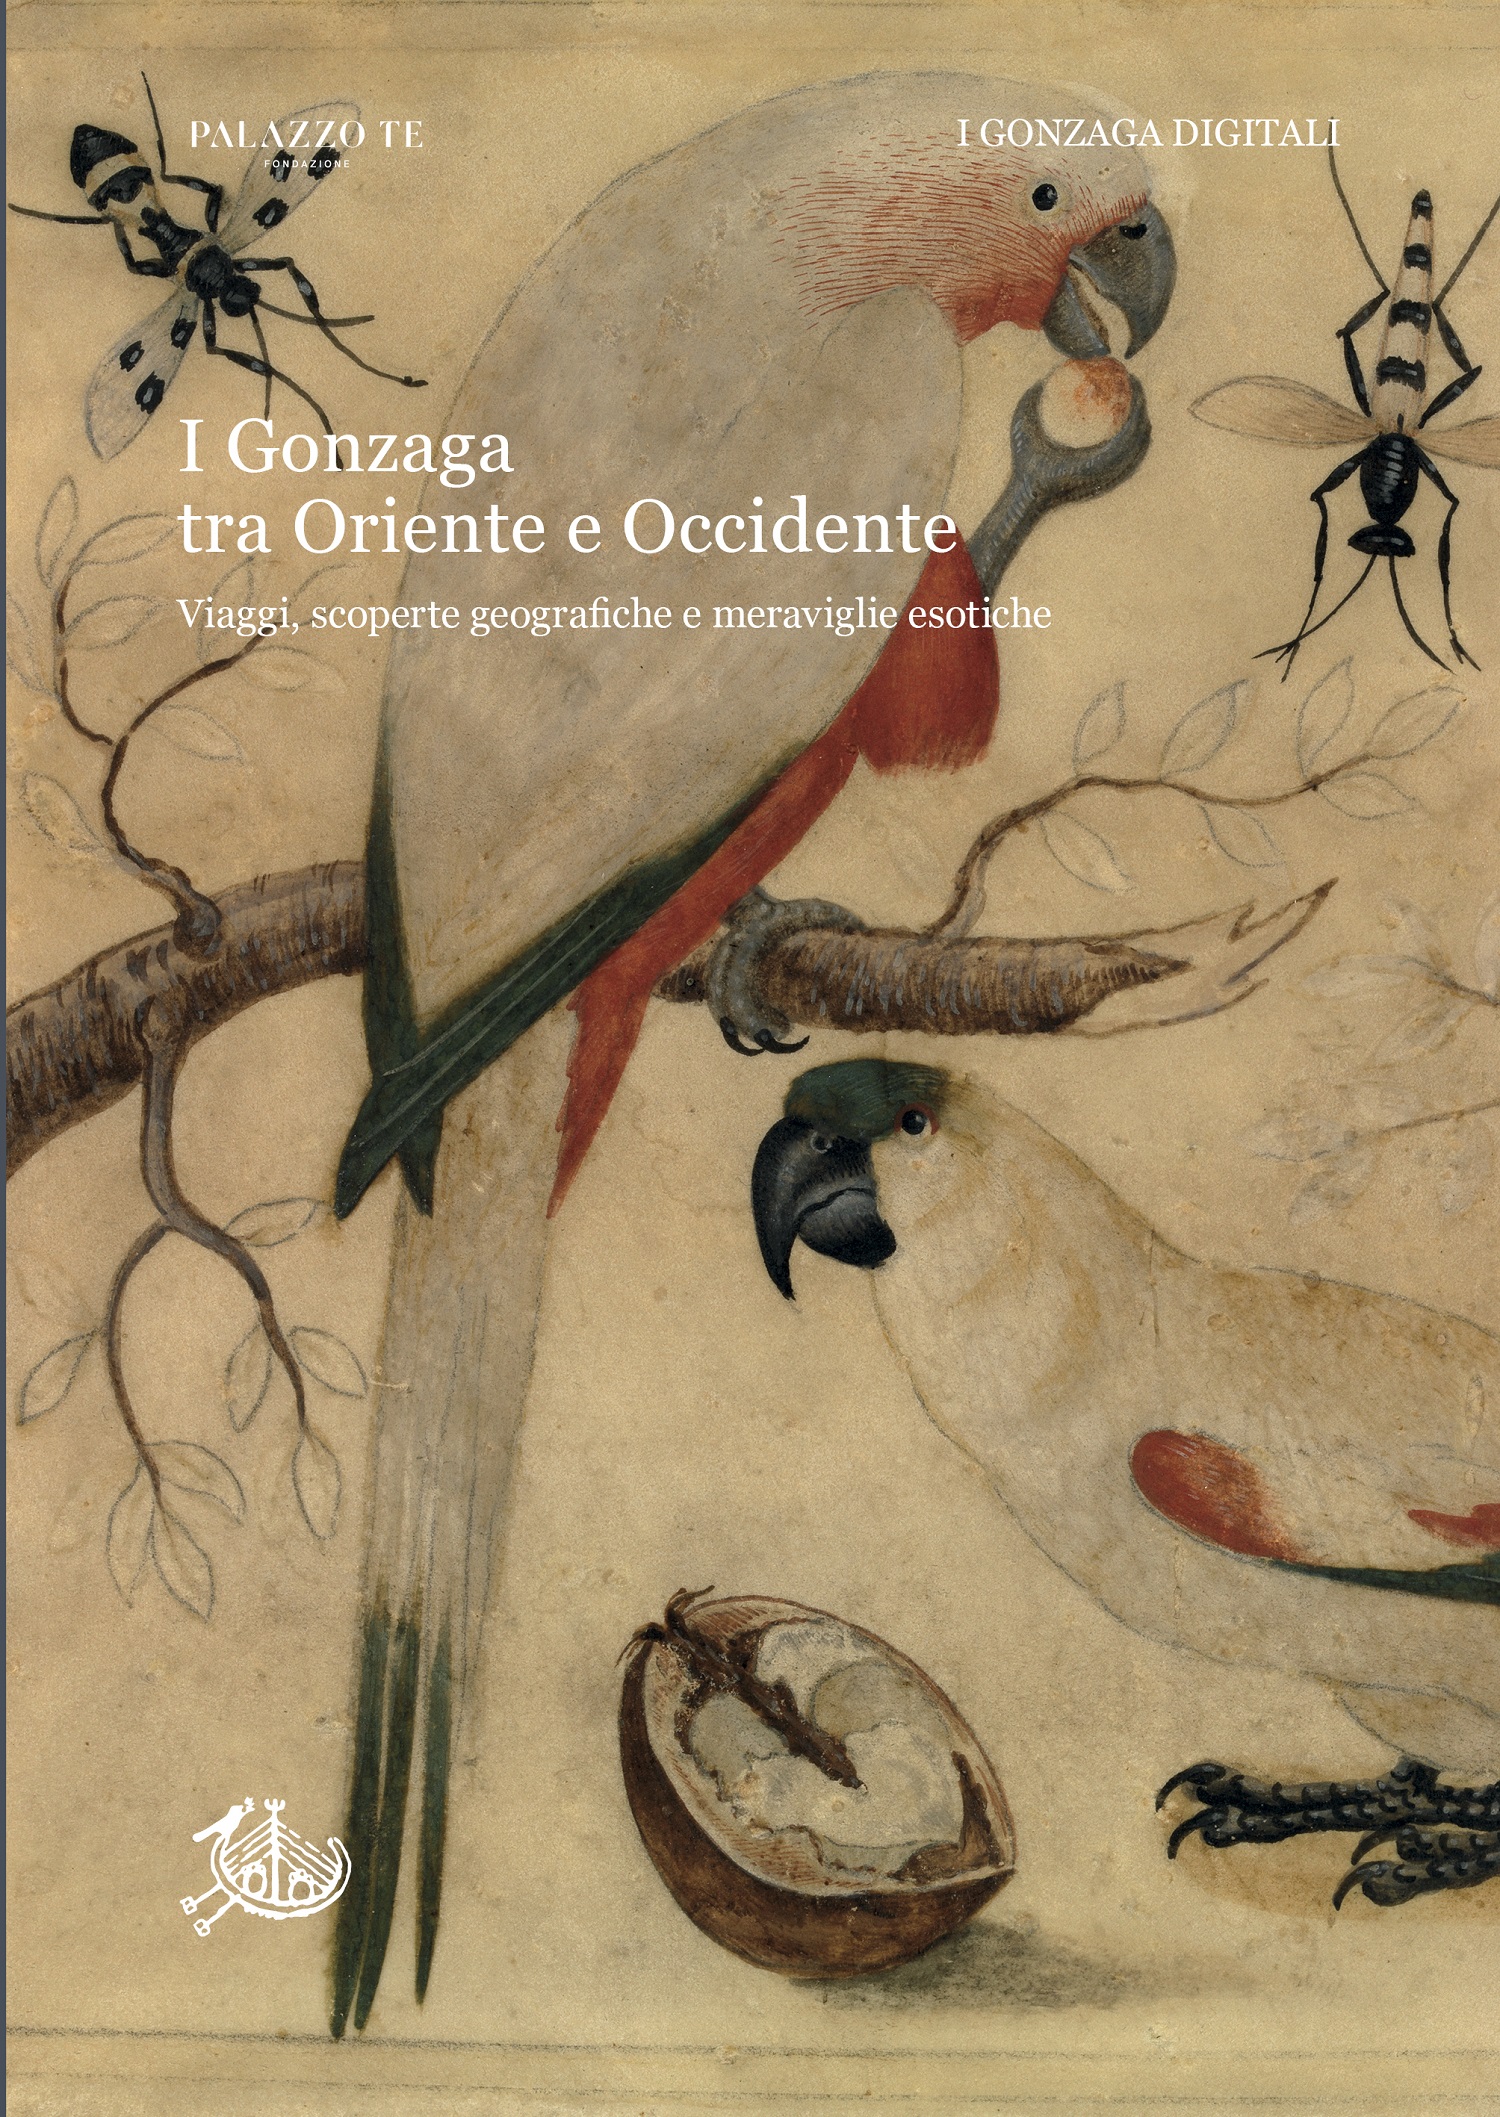 “Gonzagas between East and West. Voyages, Geographical Discoveries, and Strange Wonders,” Show at Spazio TV January 13